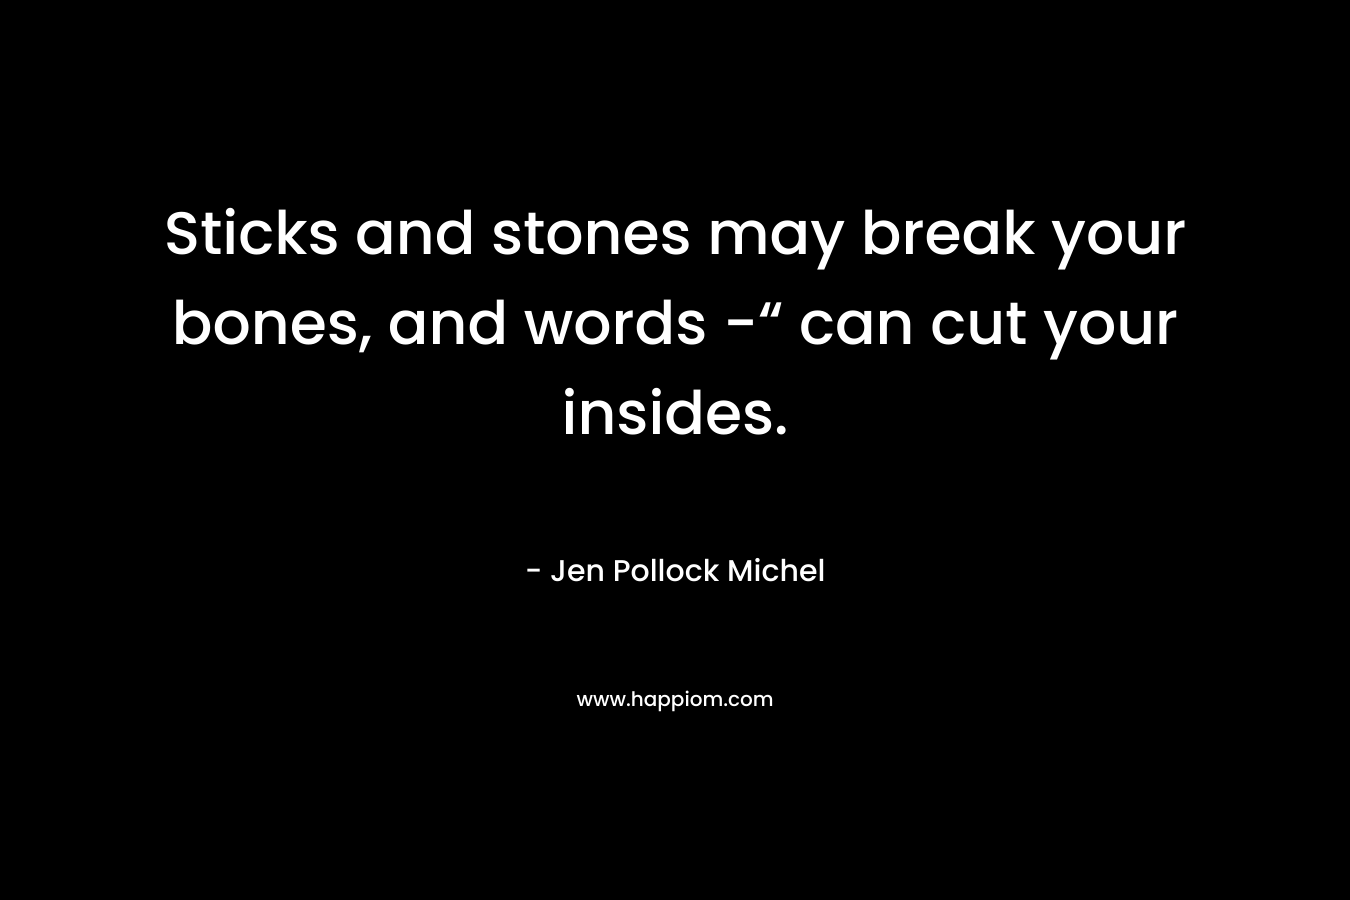 Sticks and stones may break your bones, and words -“ can cut your insides.